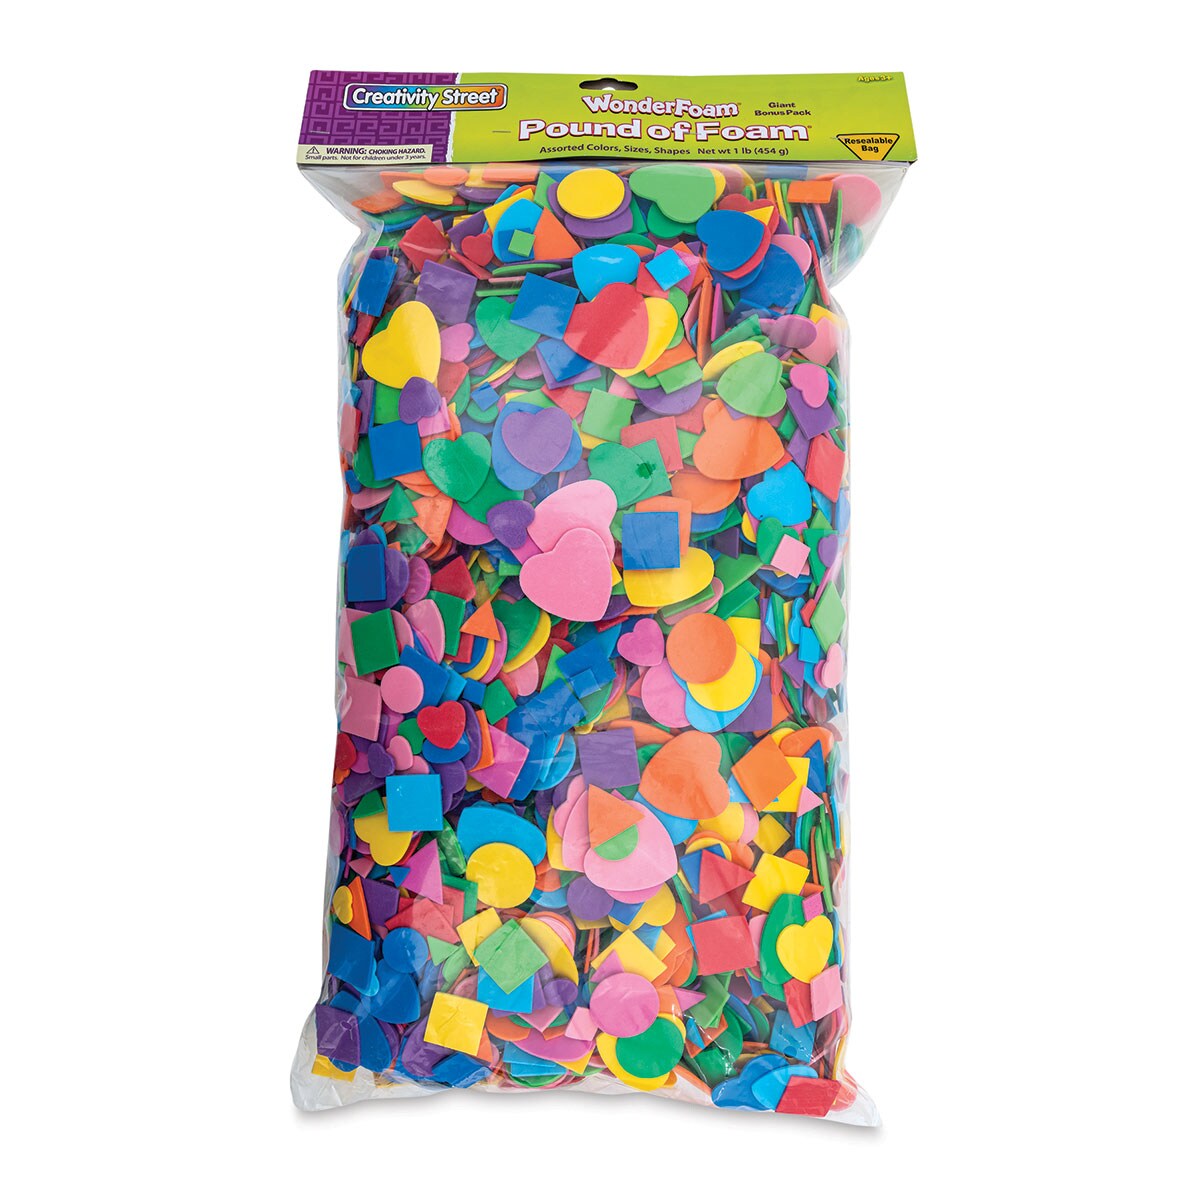 Creativity Street WonderFoam Pieces - Assorted Colors and Shapes, 1 lb, Approx 5000 Pieces